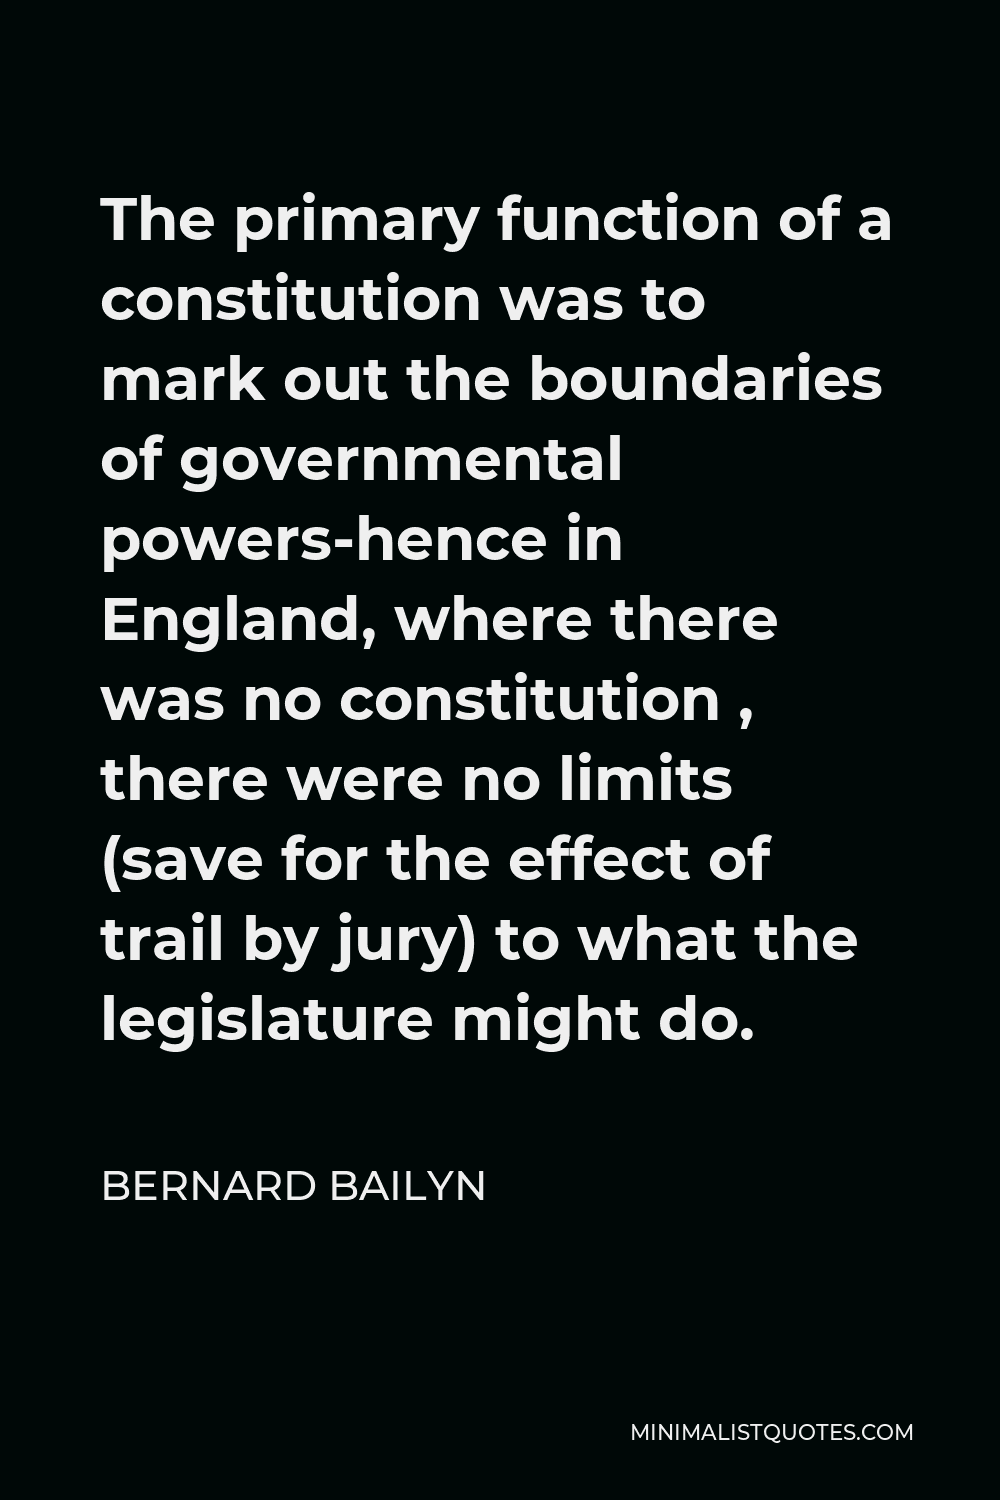 Bernard Bailyn Quote - The primary function of a constitution was to mark out the boundaries of governmental powers-hence in England, where there was no constitution , there were no limits (save for the effect of trail by jury) to what the legislature might do.